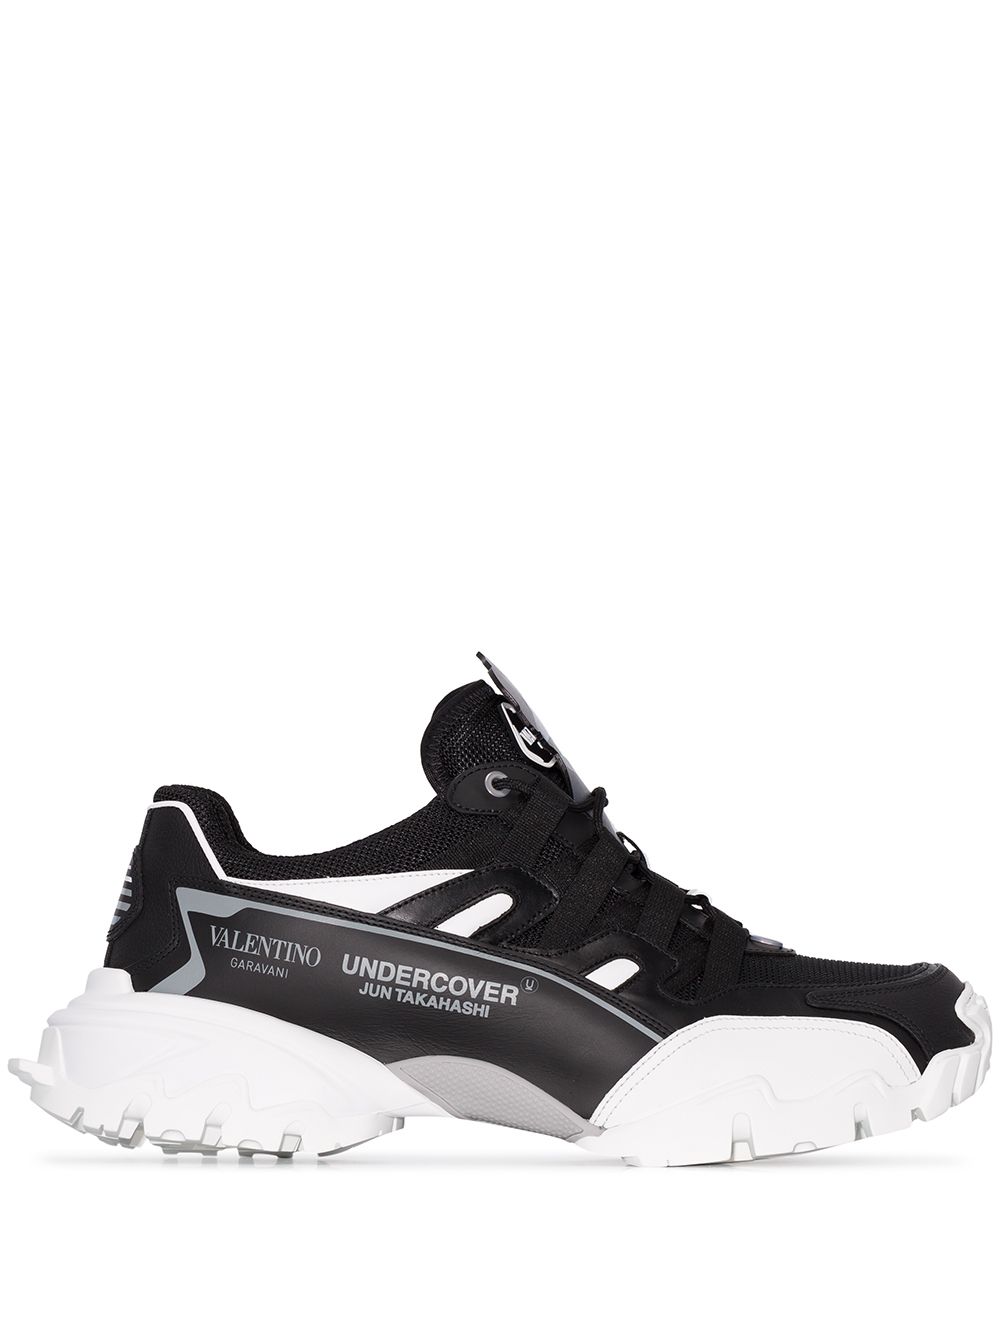 Shop Valentino Garavani x Undercover climber sneakers with Express ...